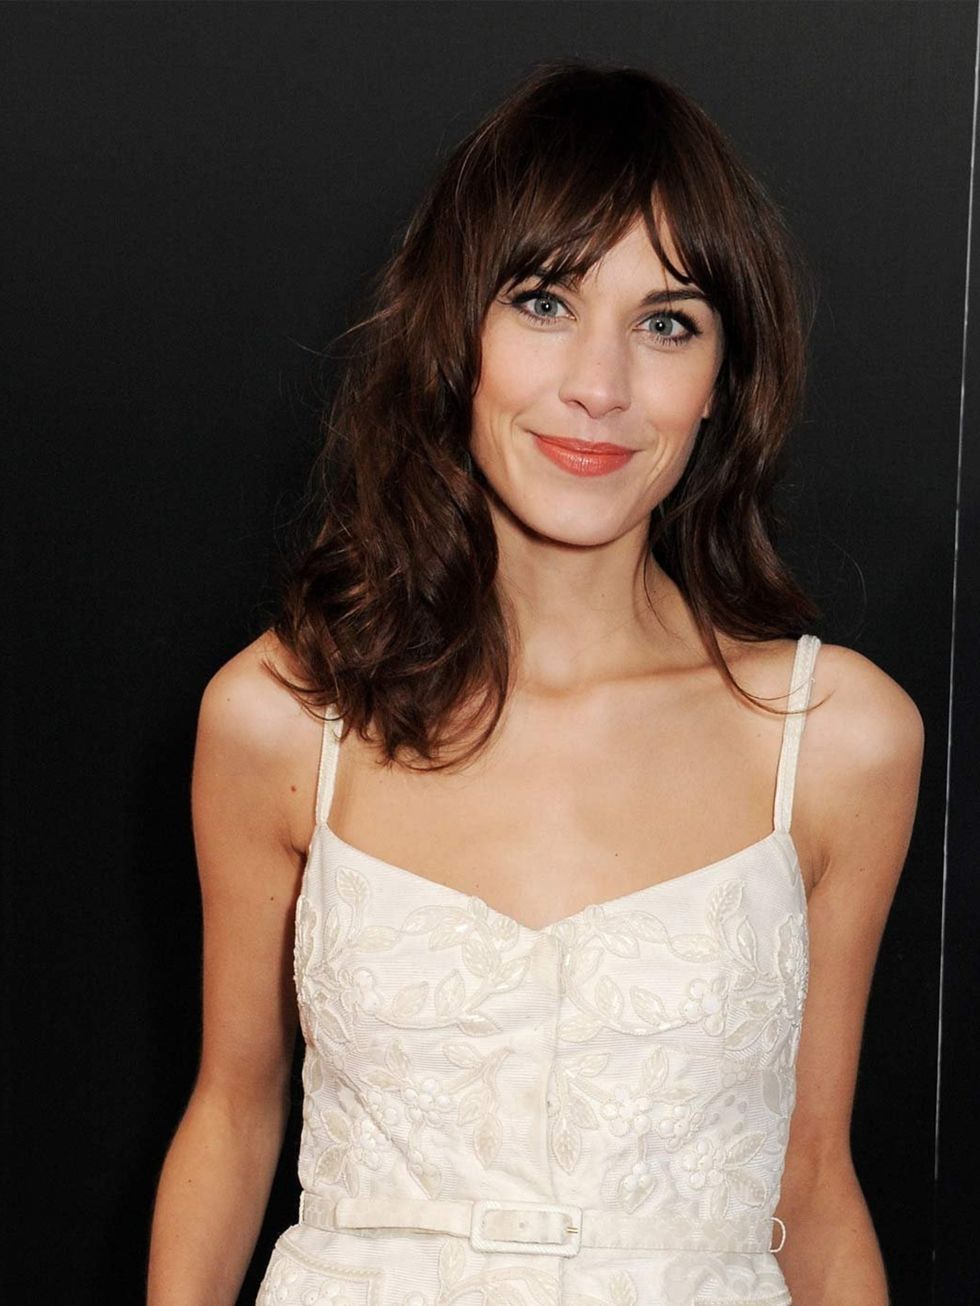 <p><a href="http://www.elleuk.com/star-style/celebrity-style-files/alexa-chung-s-style-file">Alexa Chung</a> looks ready for spring with her pretty, effortless make-up look and natural, wavy hair. </p>